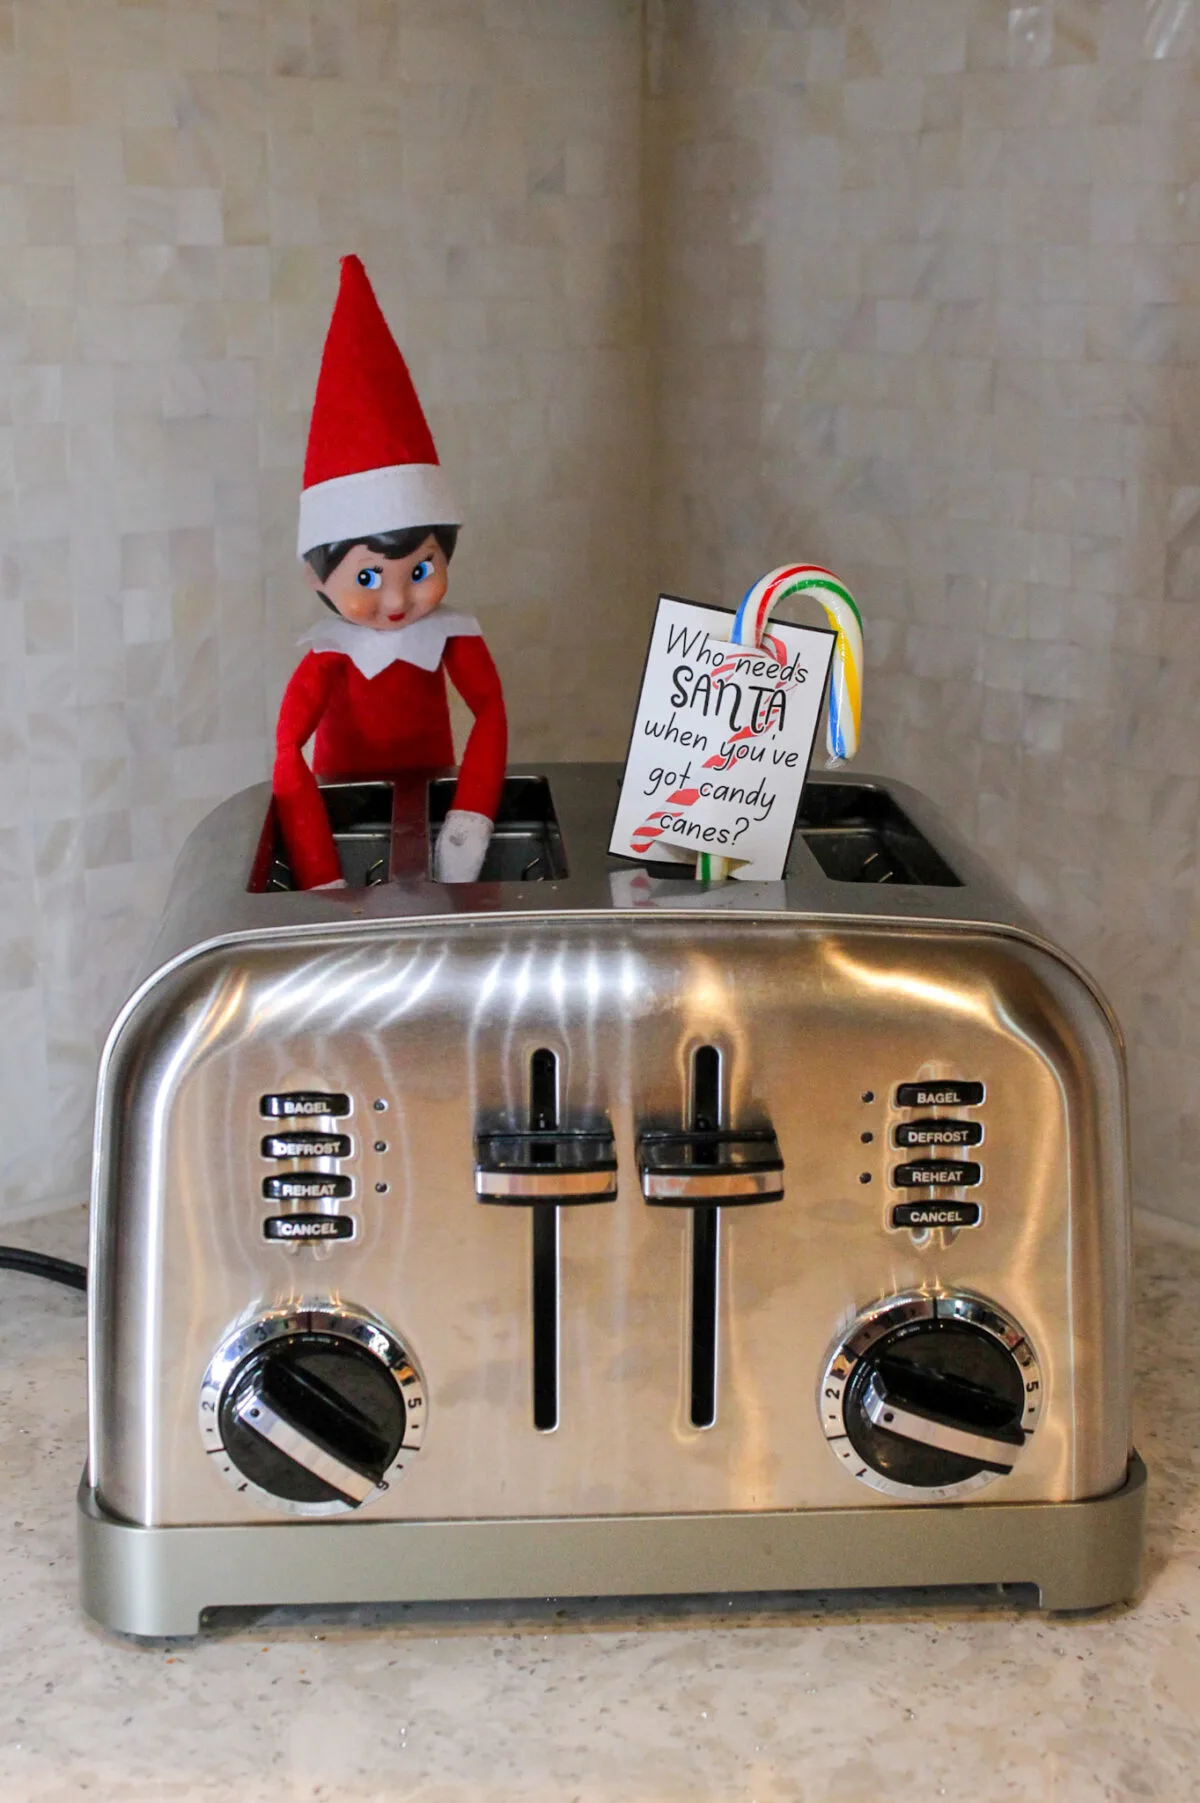 Elf on the Shelf sitting in the toaster with a candy cane